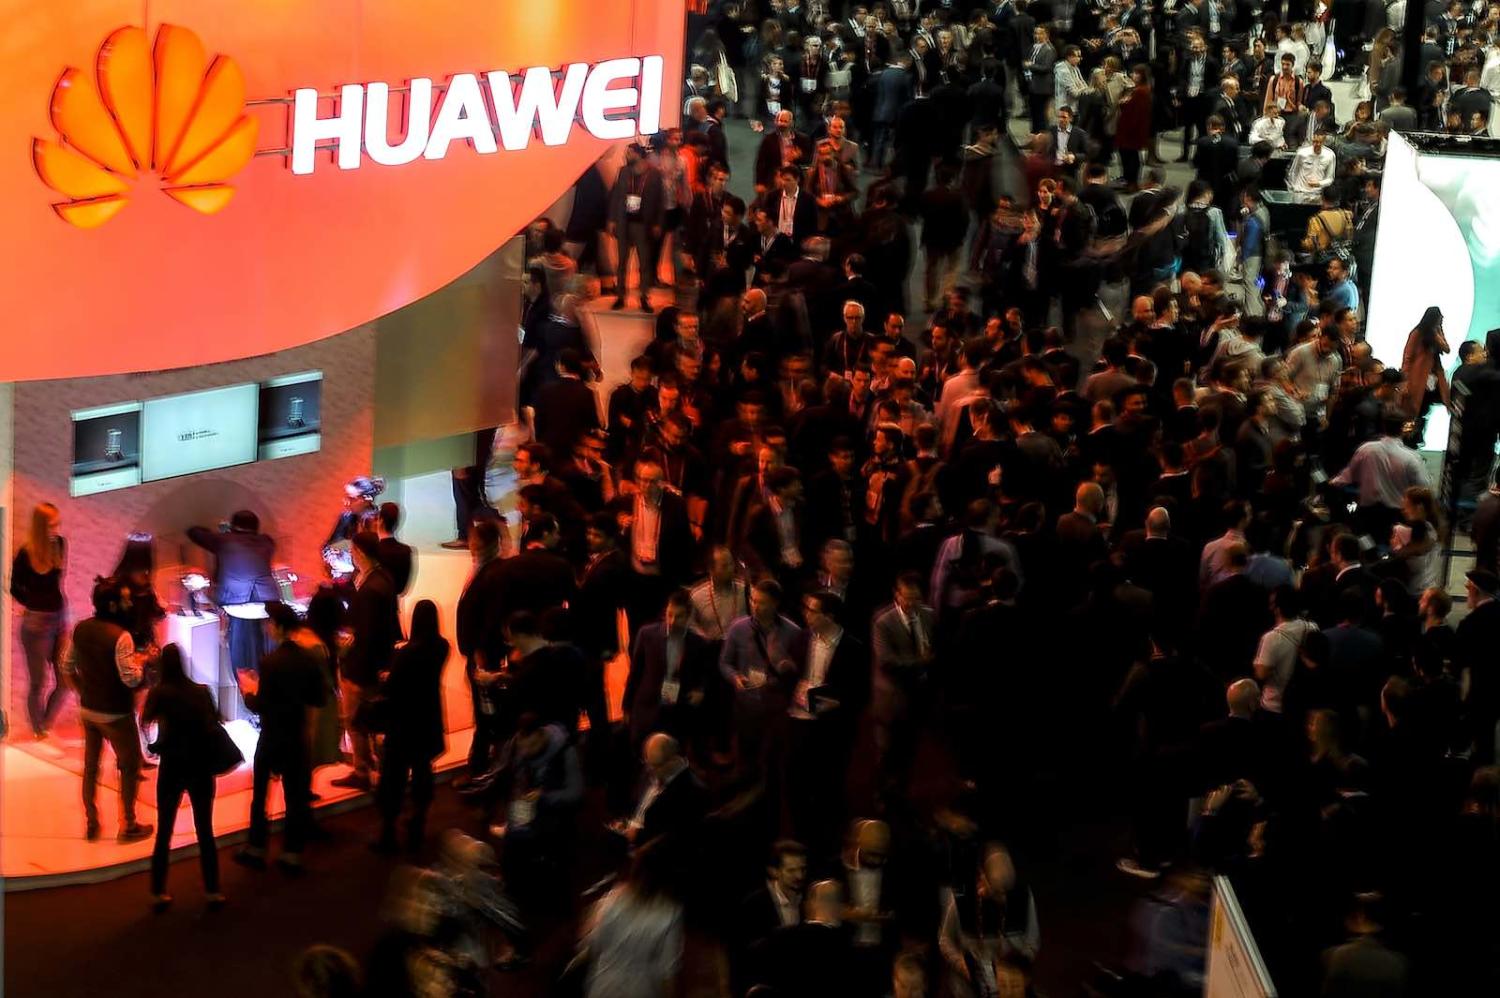 A Huawei stand at the Mobile World Congress in Barcelona, Spain, 2017 (Photo: Joan Cros Garcia via Getty)